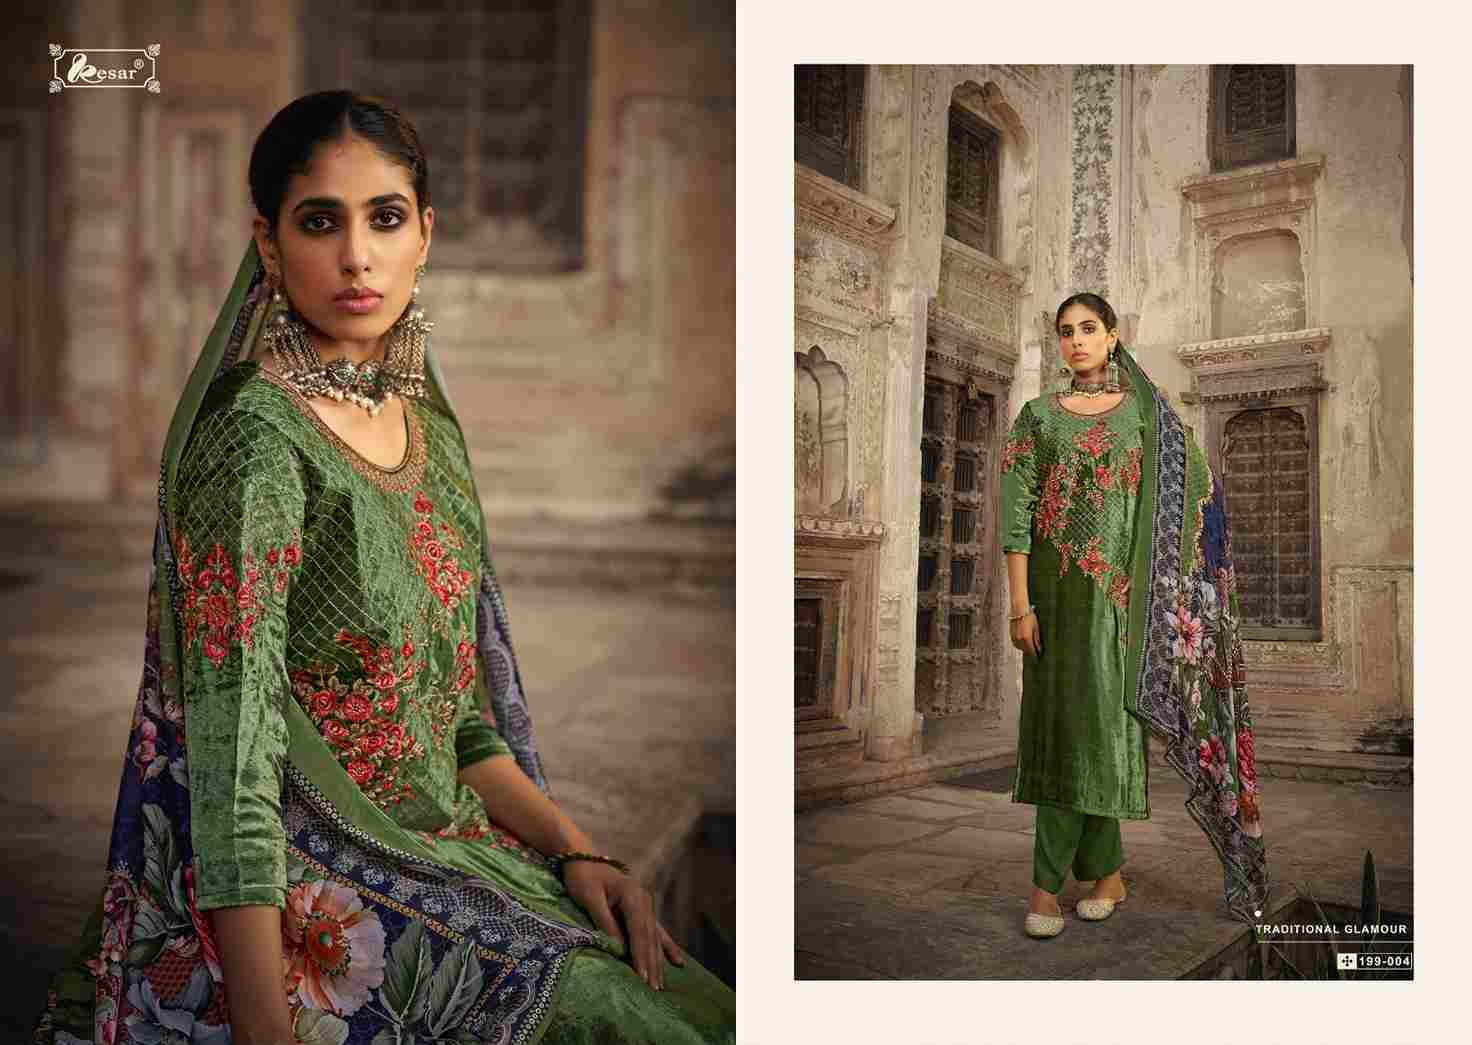 Shan-E-Sahanaz By Kesar 199-001 To 199-004 Series Beautiful Festive Suits Colorful Stylish Fancy Casual Wear & Ethnic Wear Pure Viscose Velvet Digital Print Dresses At Wholesale Price